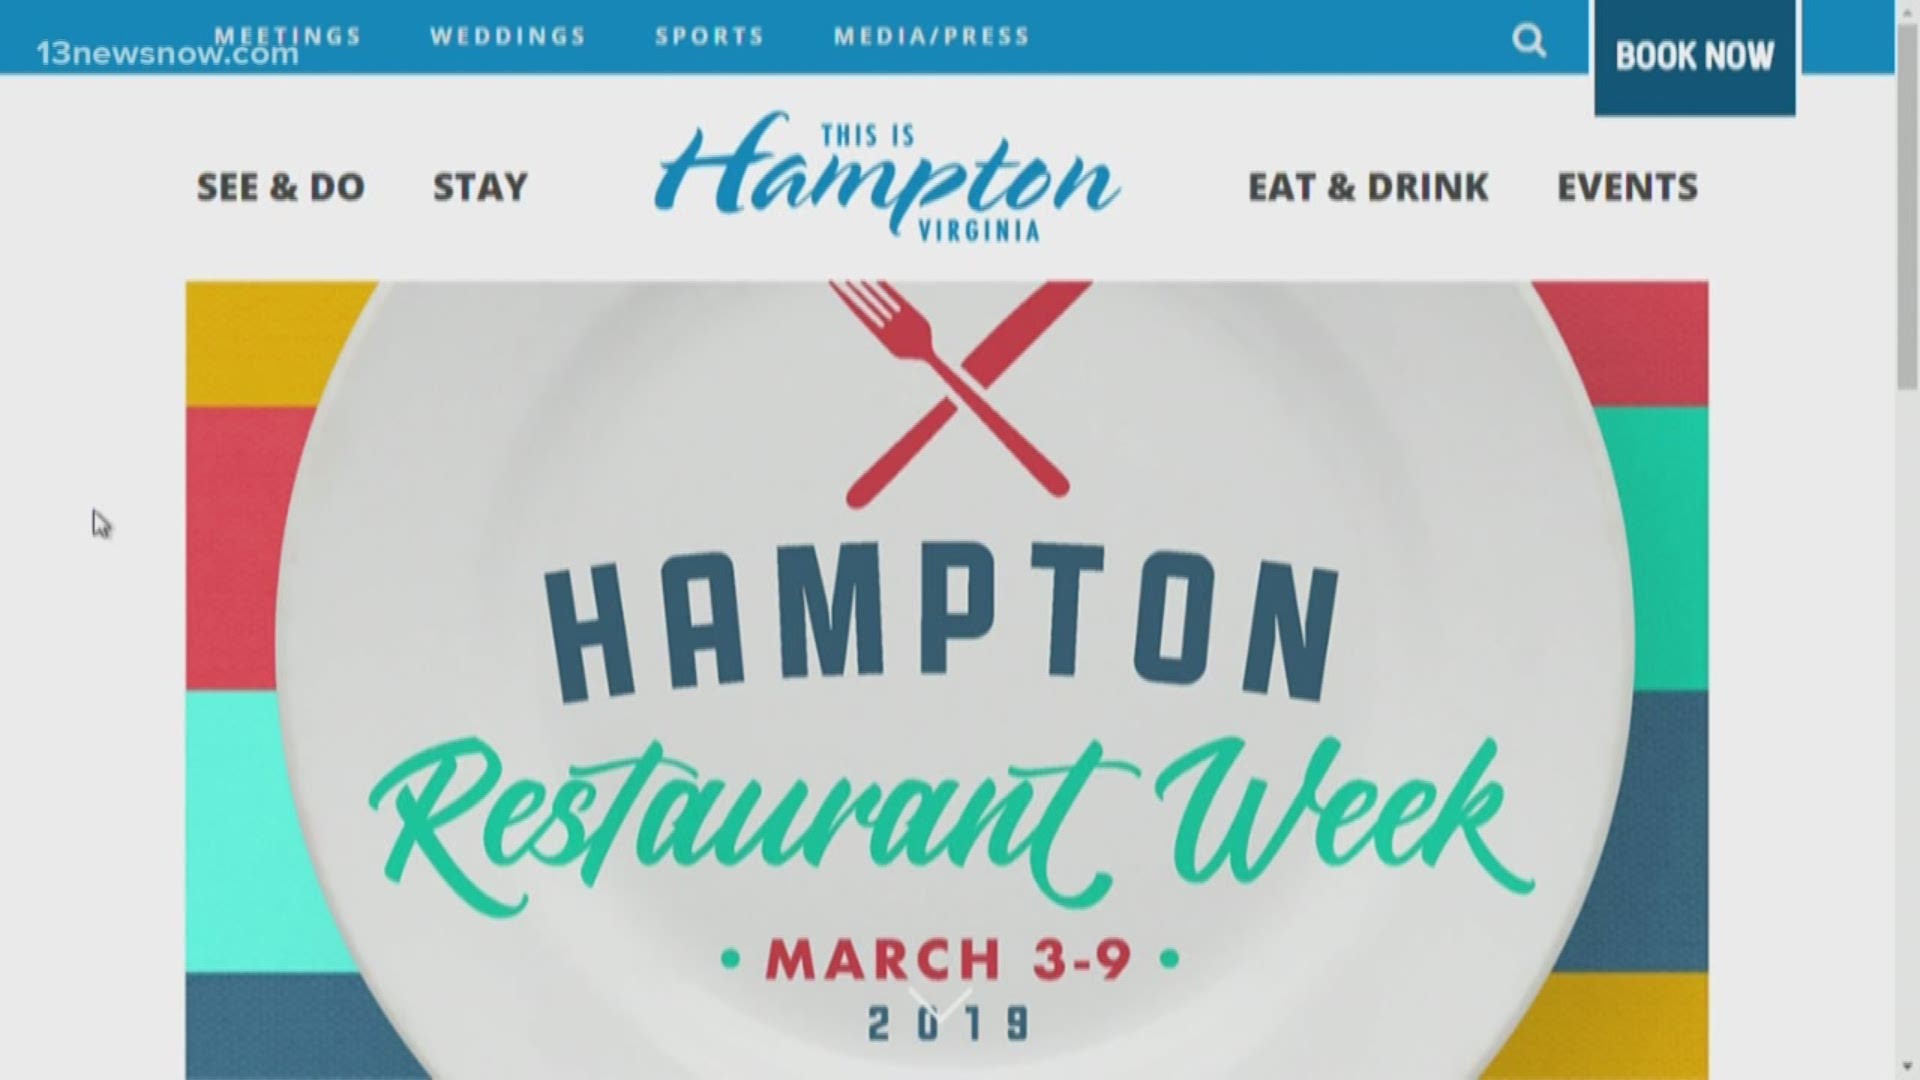 During Restaurant Week, you’ll be able to enjoy a 2-course lunch for $10 or $15 and/or a 3-course meal for either $20 or $30 at participating restaurants.